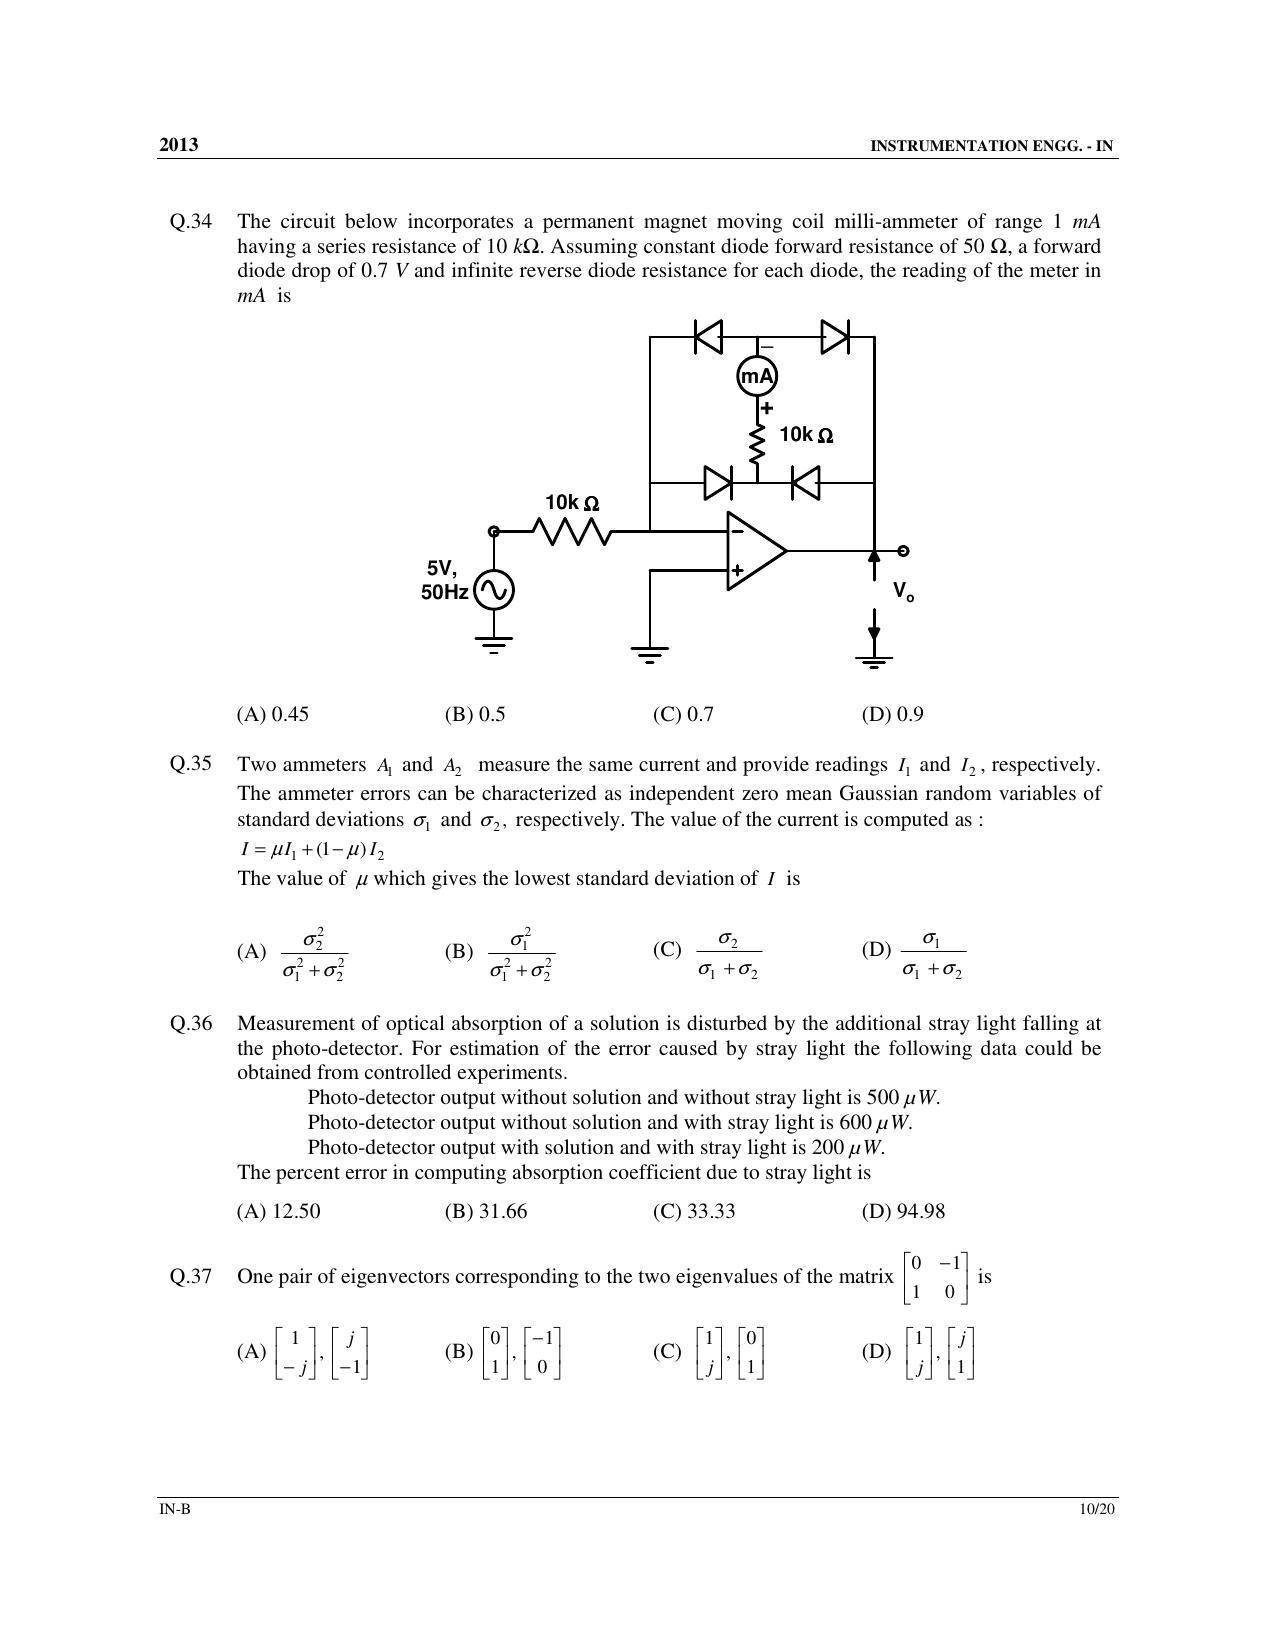 GATE 2013 Instrumentation Engineering (IN) Question Paper with Answer Key - Page 28